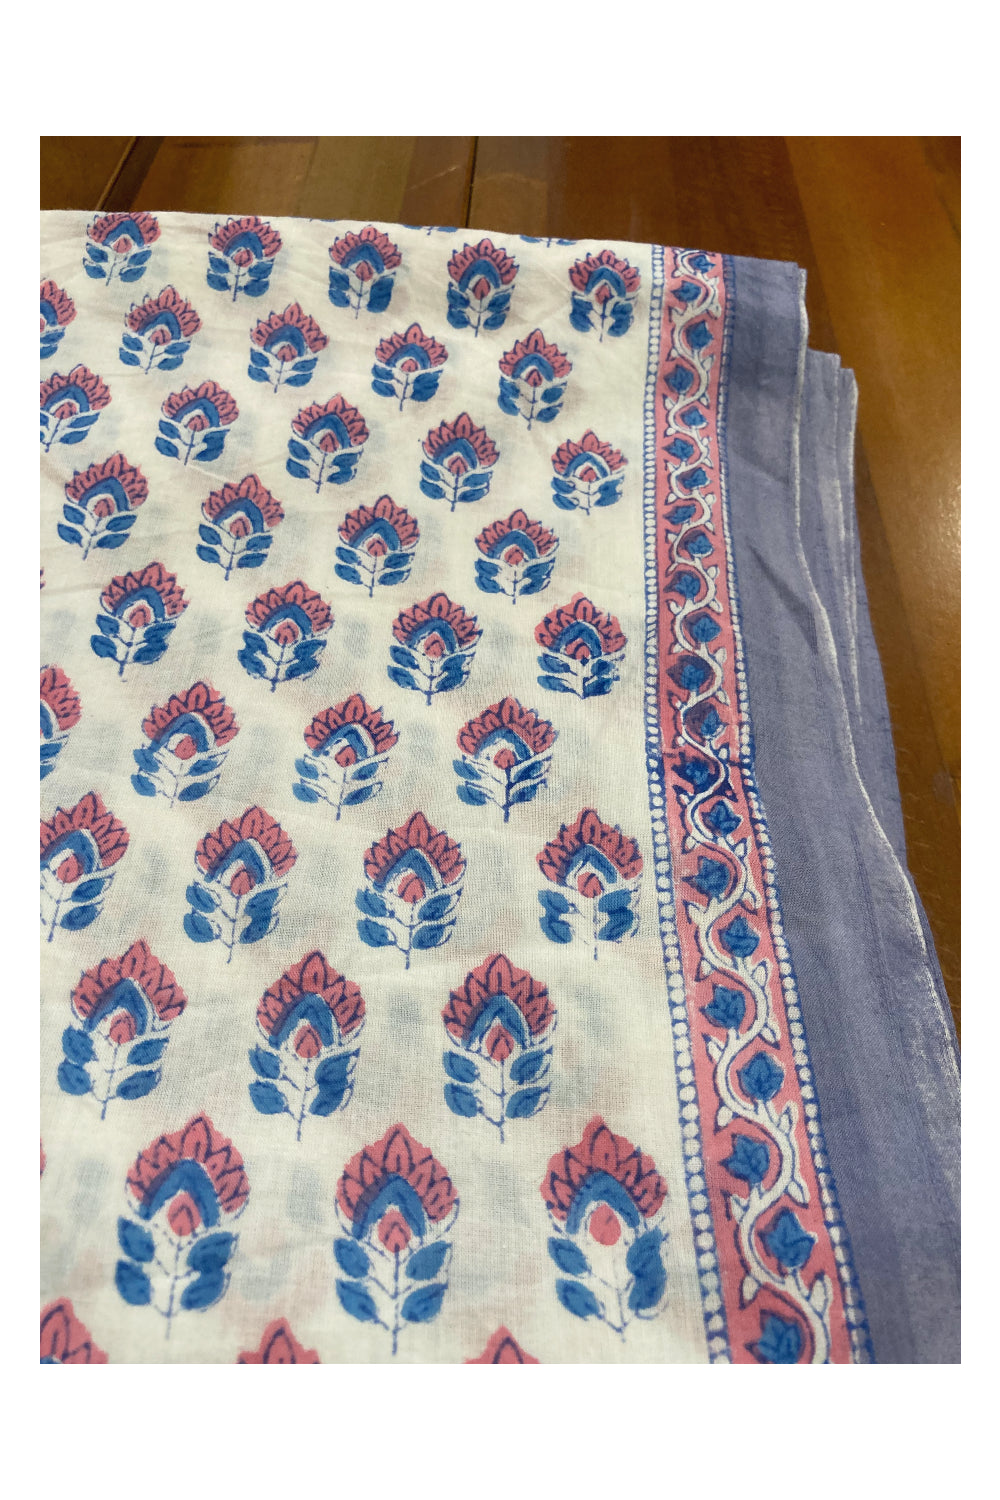 Southloom Blue and Pink Floral Hand Block Printed Soft Cotton Jaipur Salwar Suit Material in White Base Colour